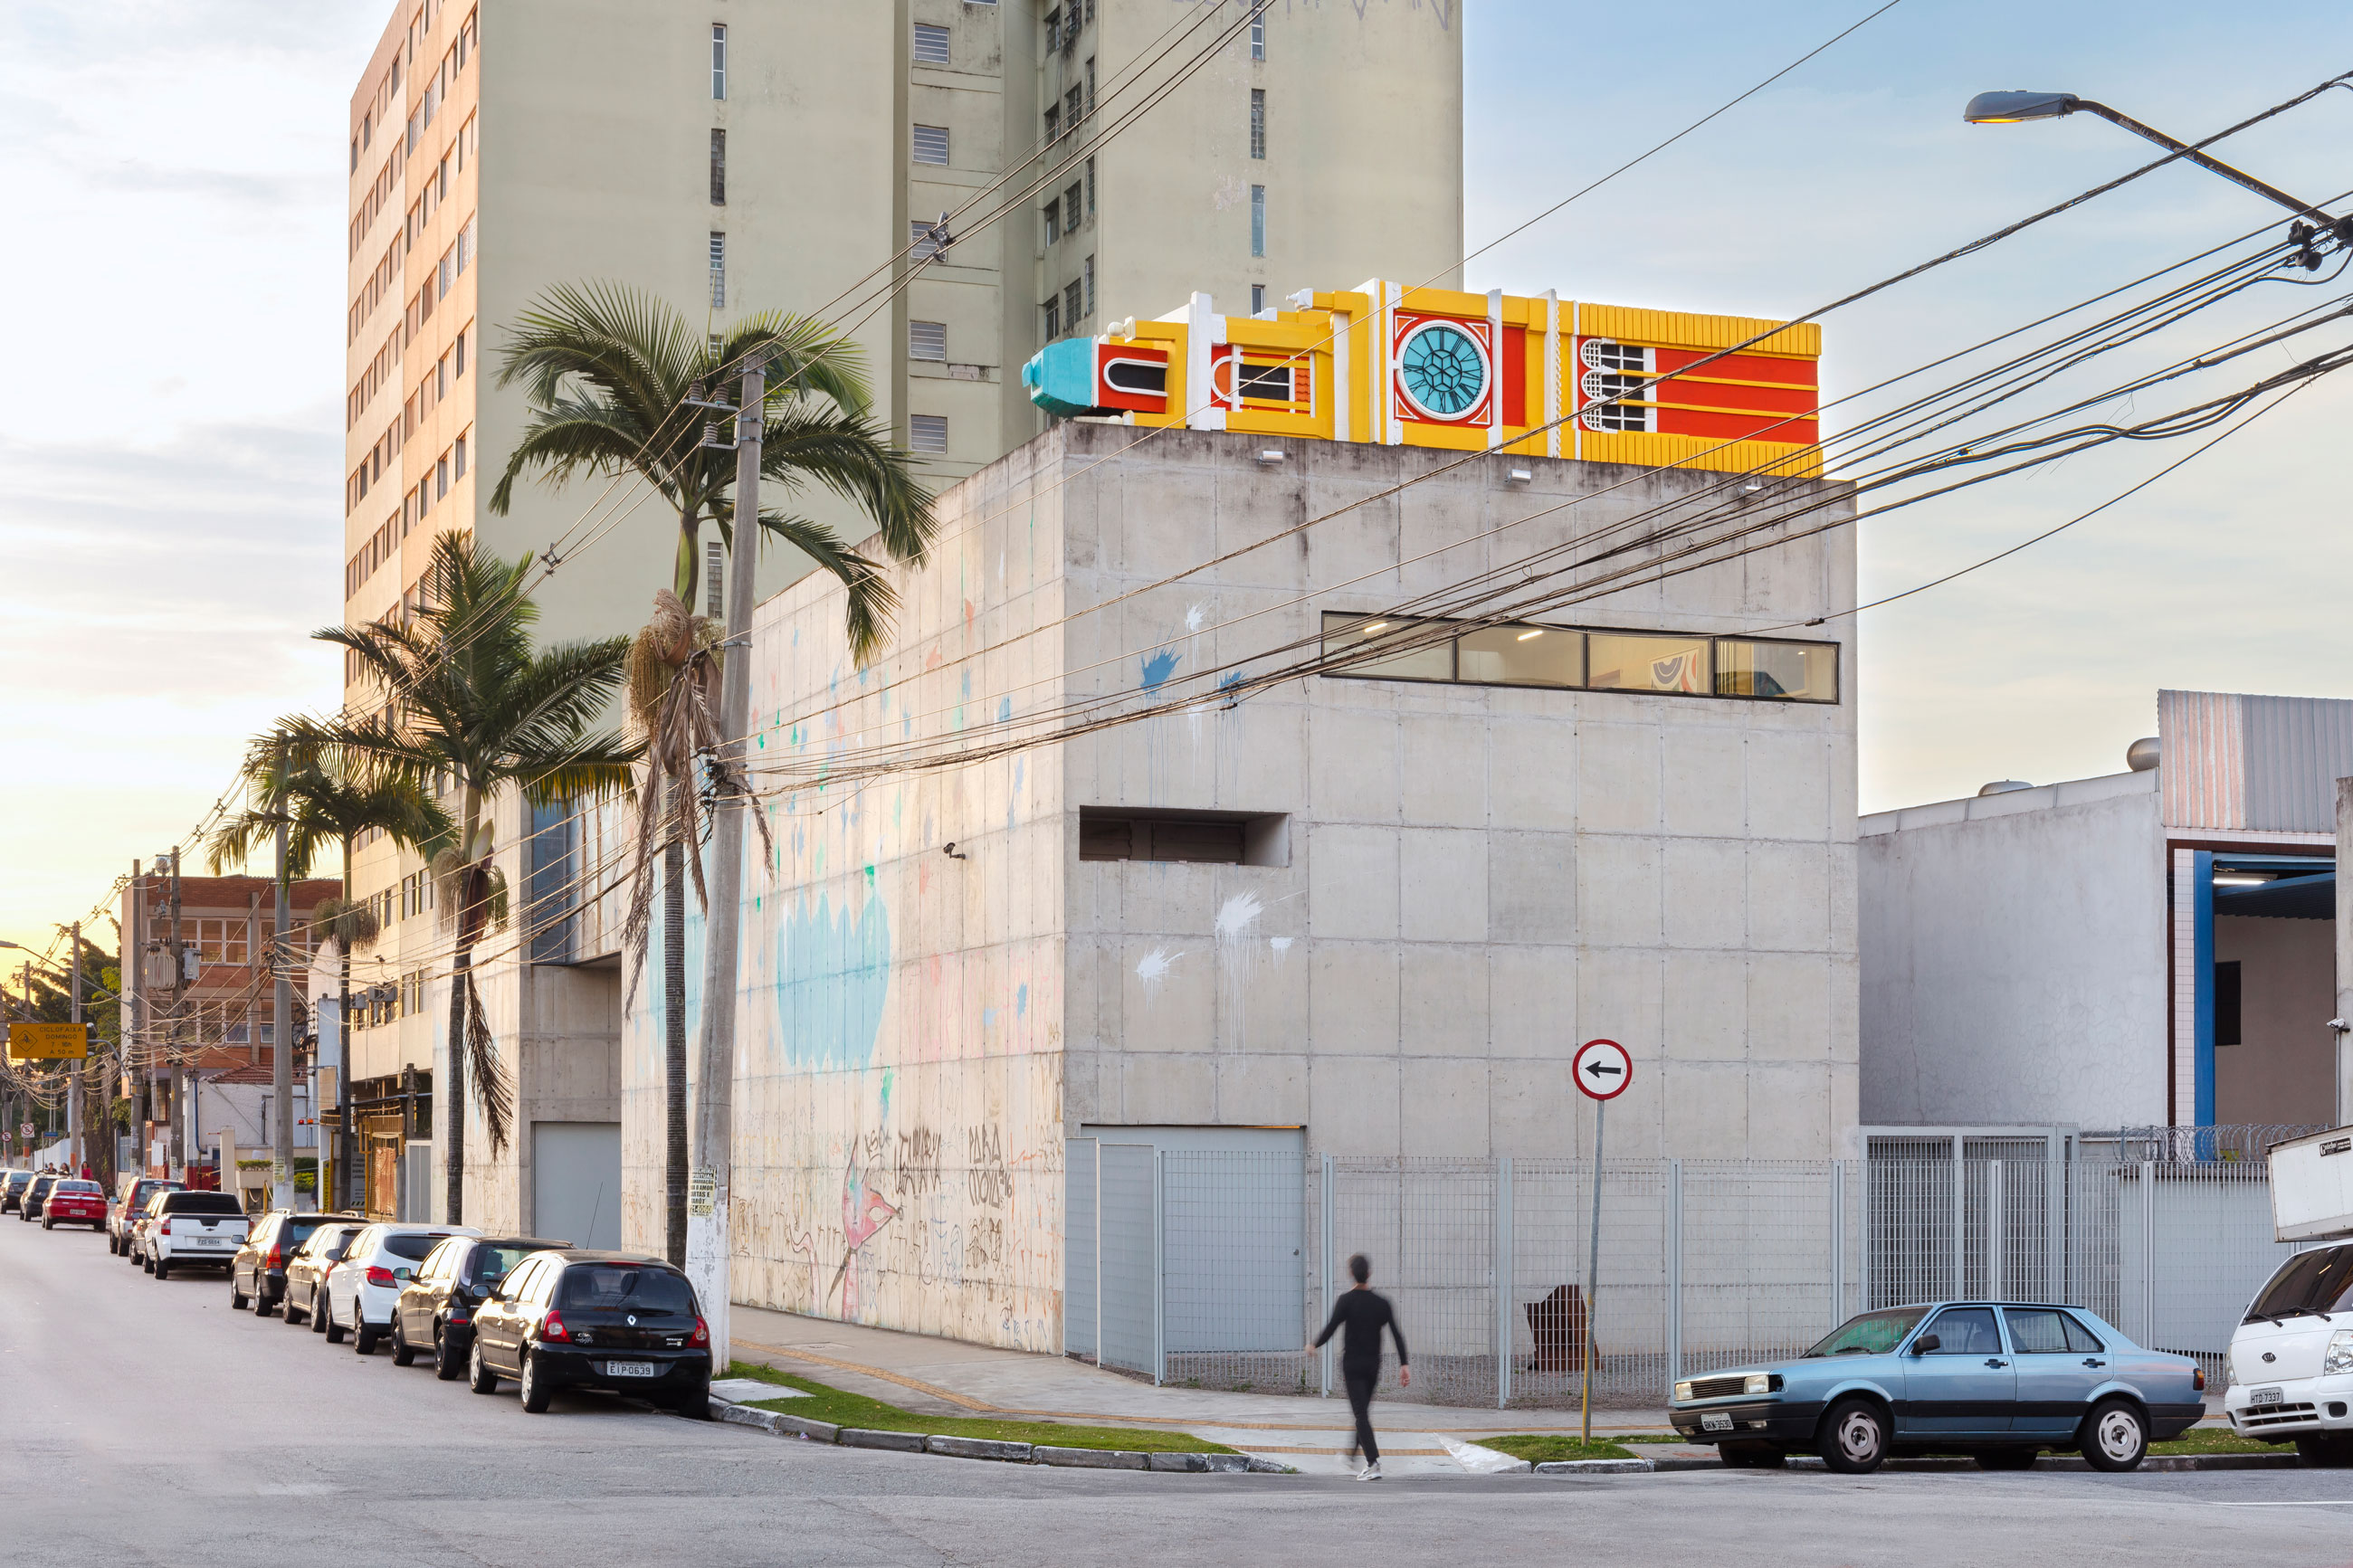 Site-specific Installation titled Friends of Perpetual Movement by artist Quinteros, consisting of a clock tower built with foam, paint, wooden structure, curated by Bruno Alves de Almeida for the project SITU at Galeria Leme, São Paulo, Brazil.